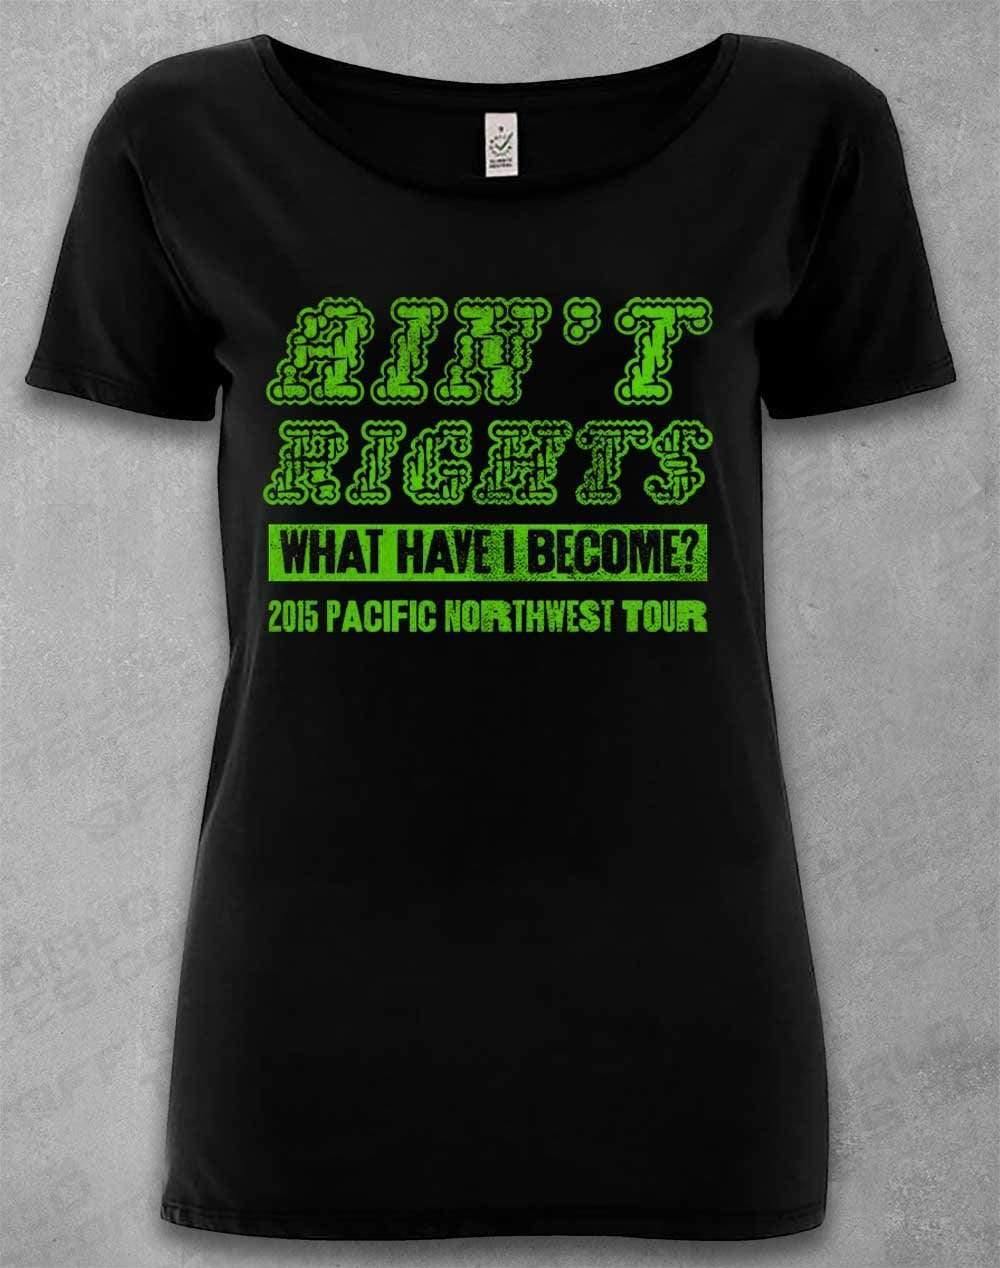 DELUXE Ain't Rights 2015 Tour Organic Scoop Neck T-Shirt 8-10 / Black  - Off World Tees